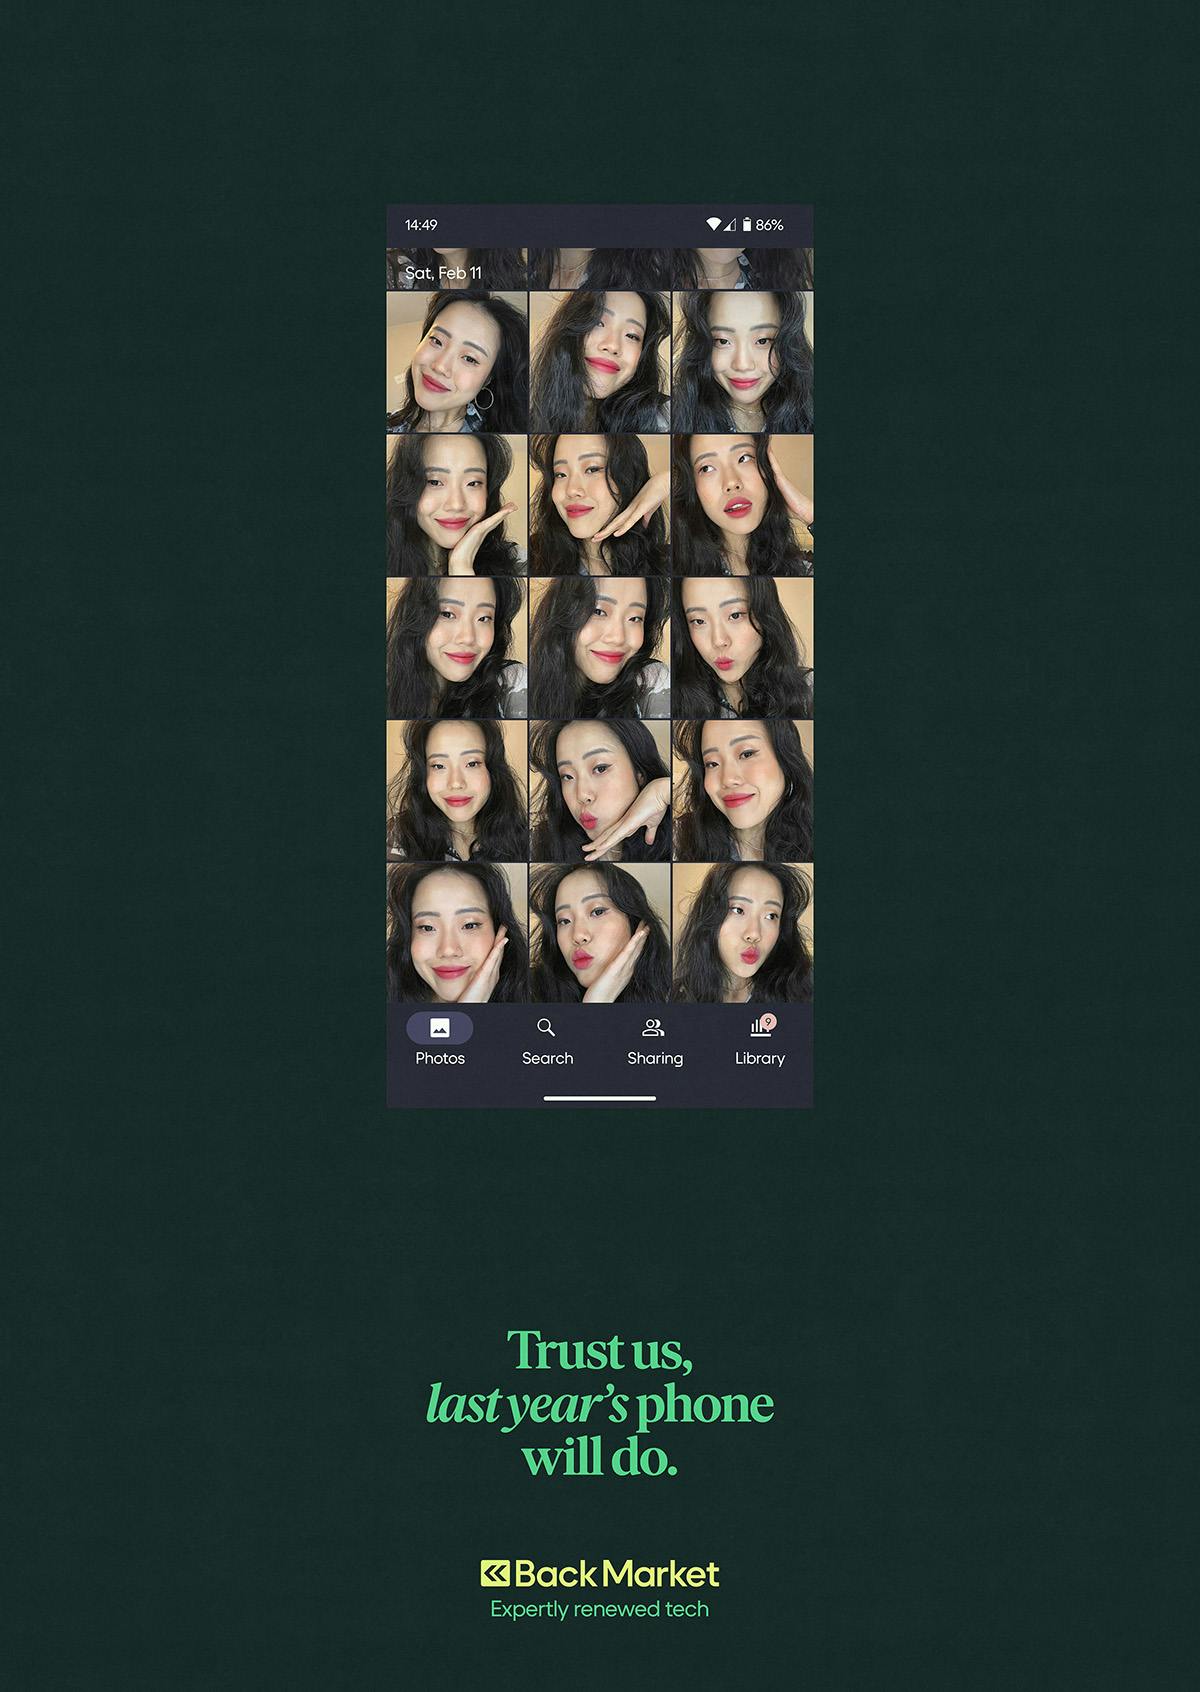 Image from Back Market's campaign showing a picture of a camera roll filled with near identical selfies, and the headline 'Trust us, last year's phone will do' on a dark green background